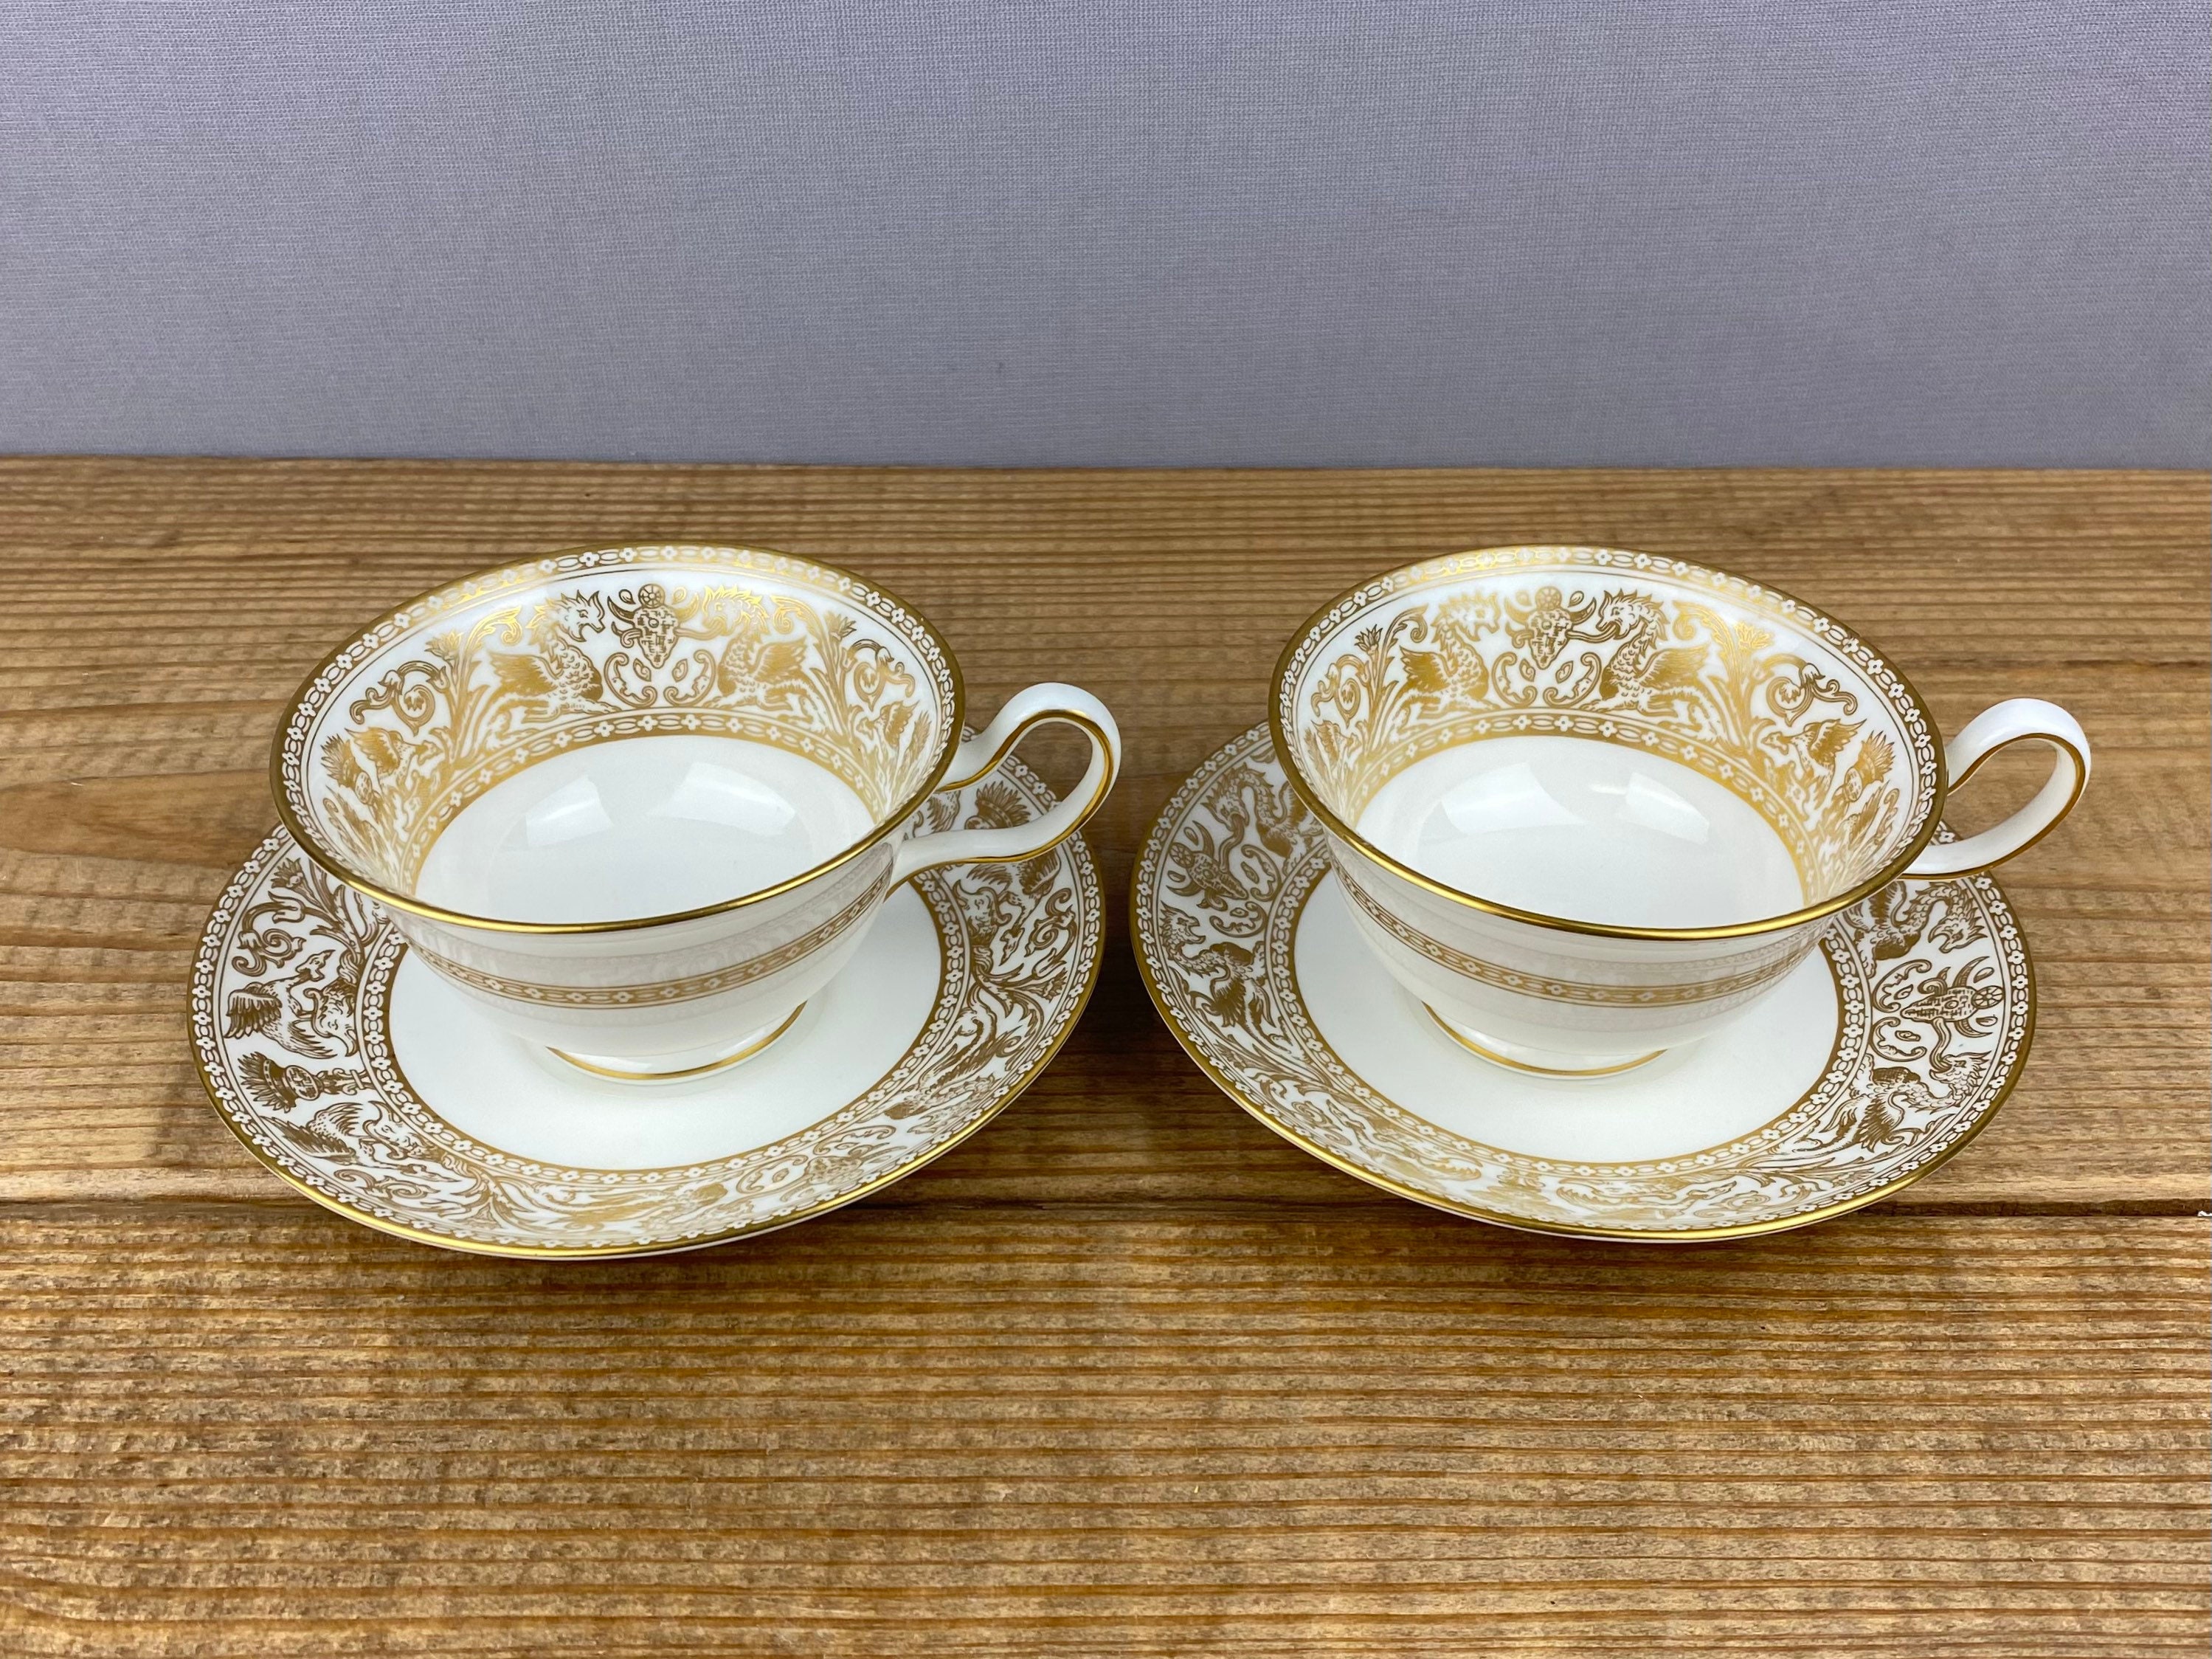 More Available! Wedgwood Gold Florentine Tea Cup and Saucer Set Excellent 